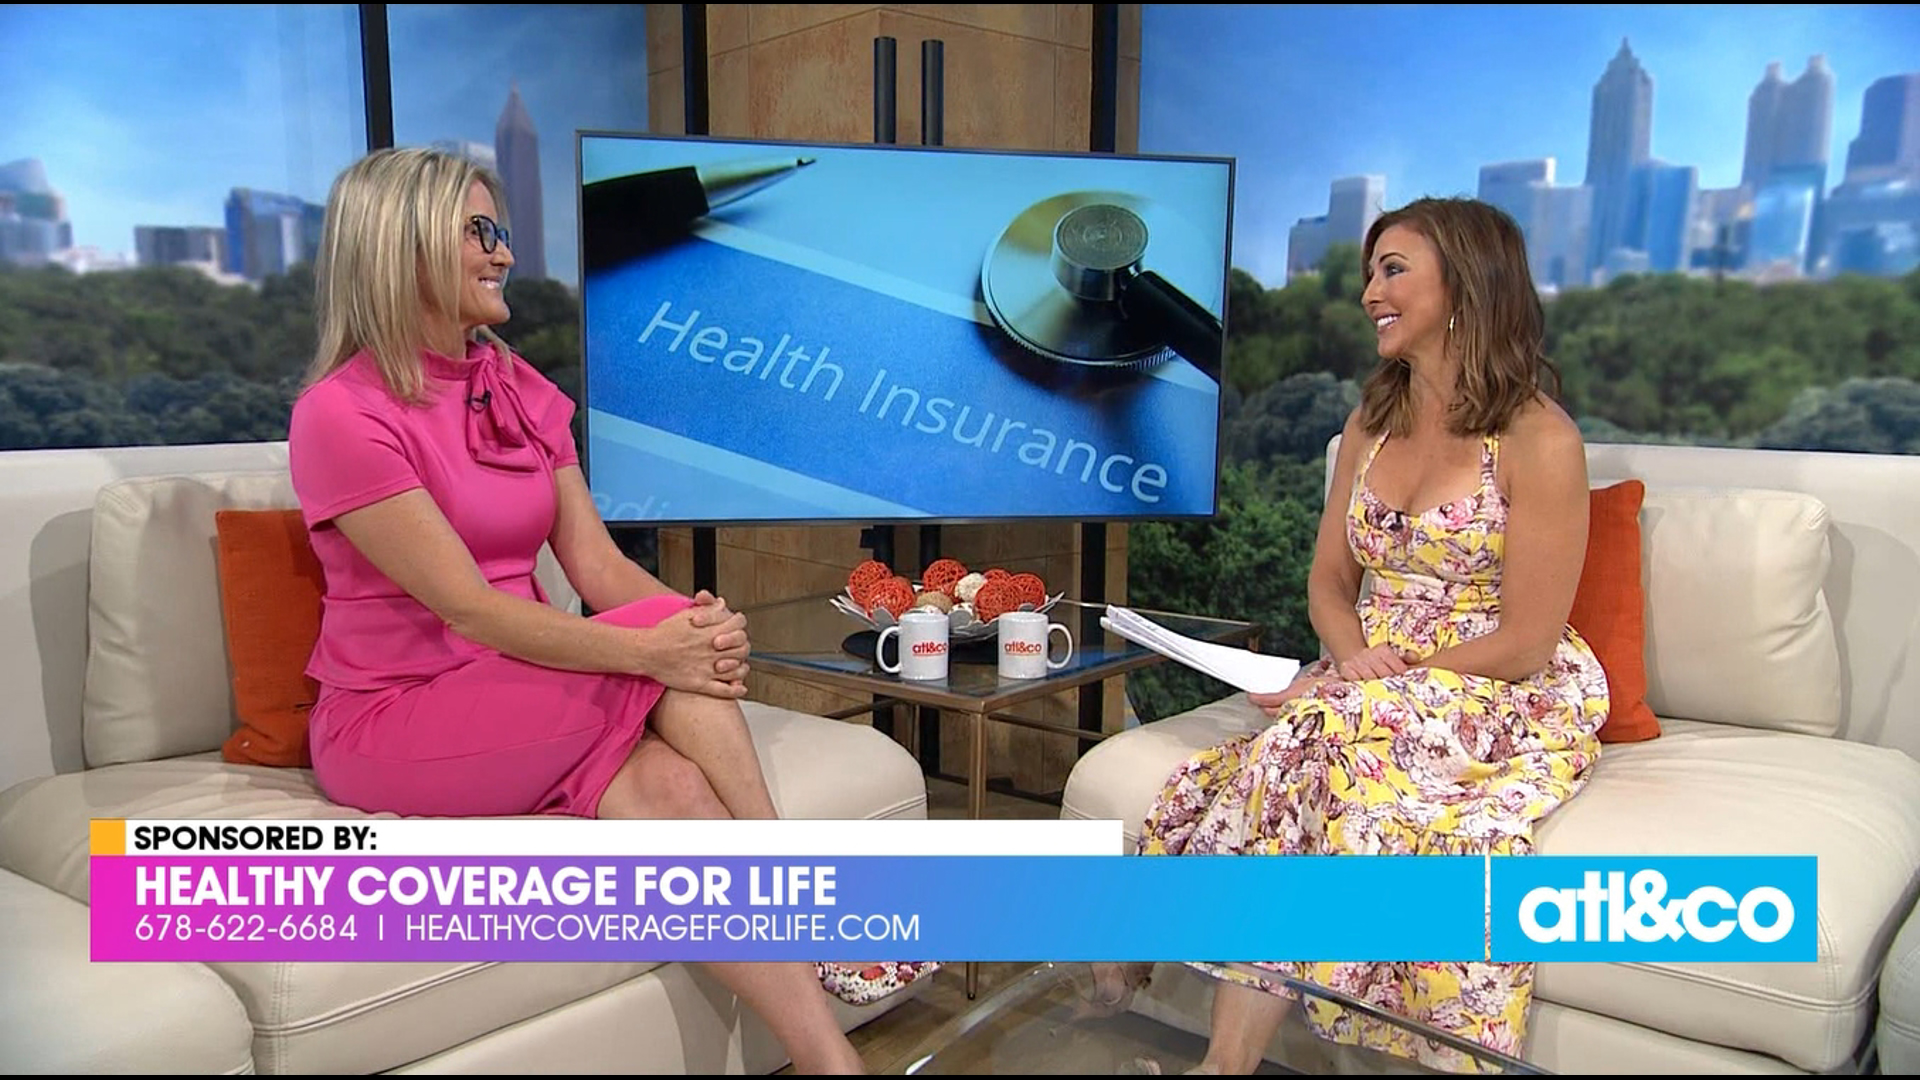 Health insurance advisor Kristi Gorinas shares how to get the best benefits at an affordable rate.